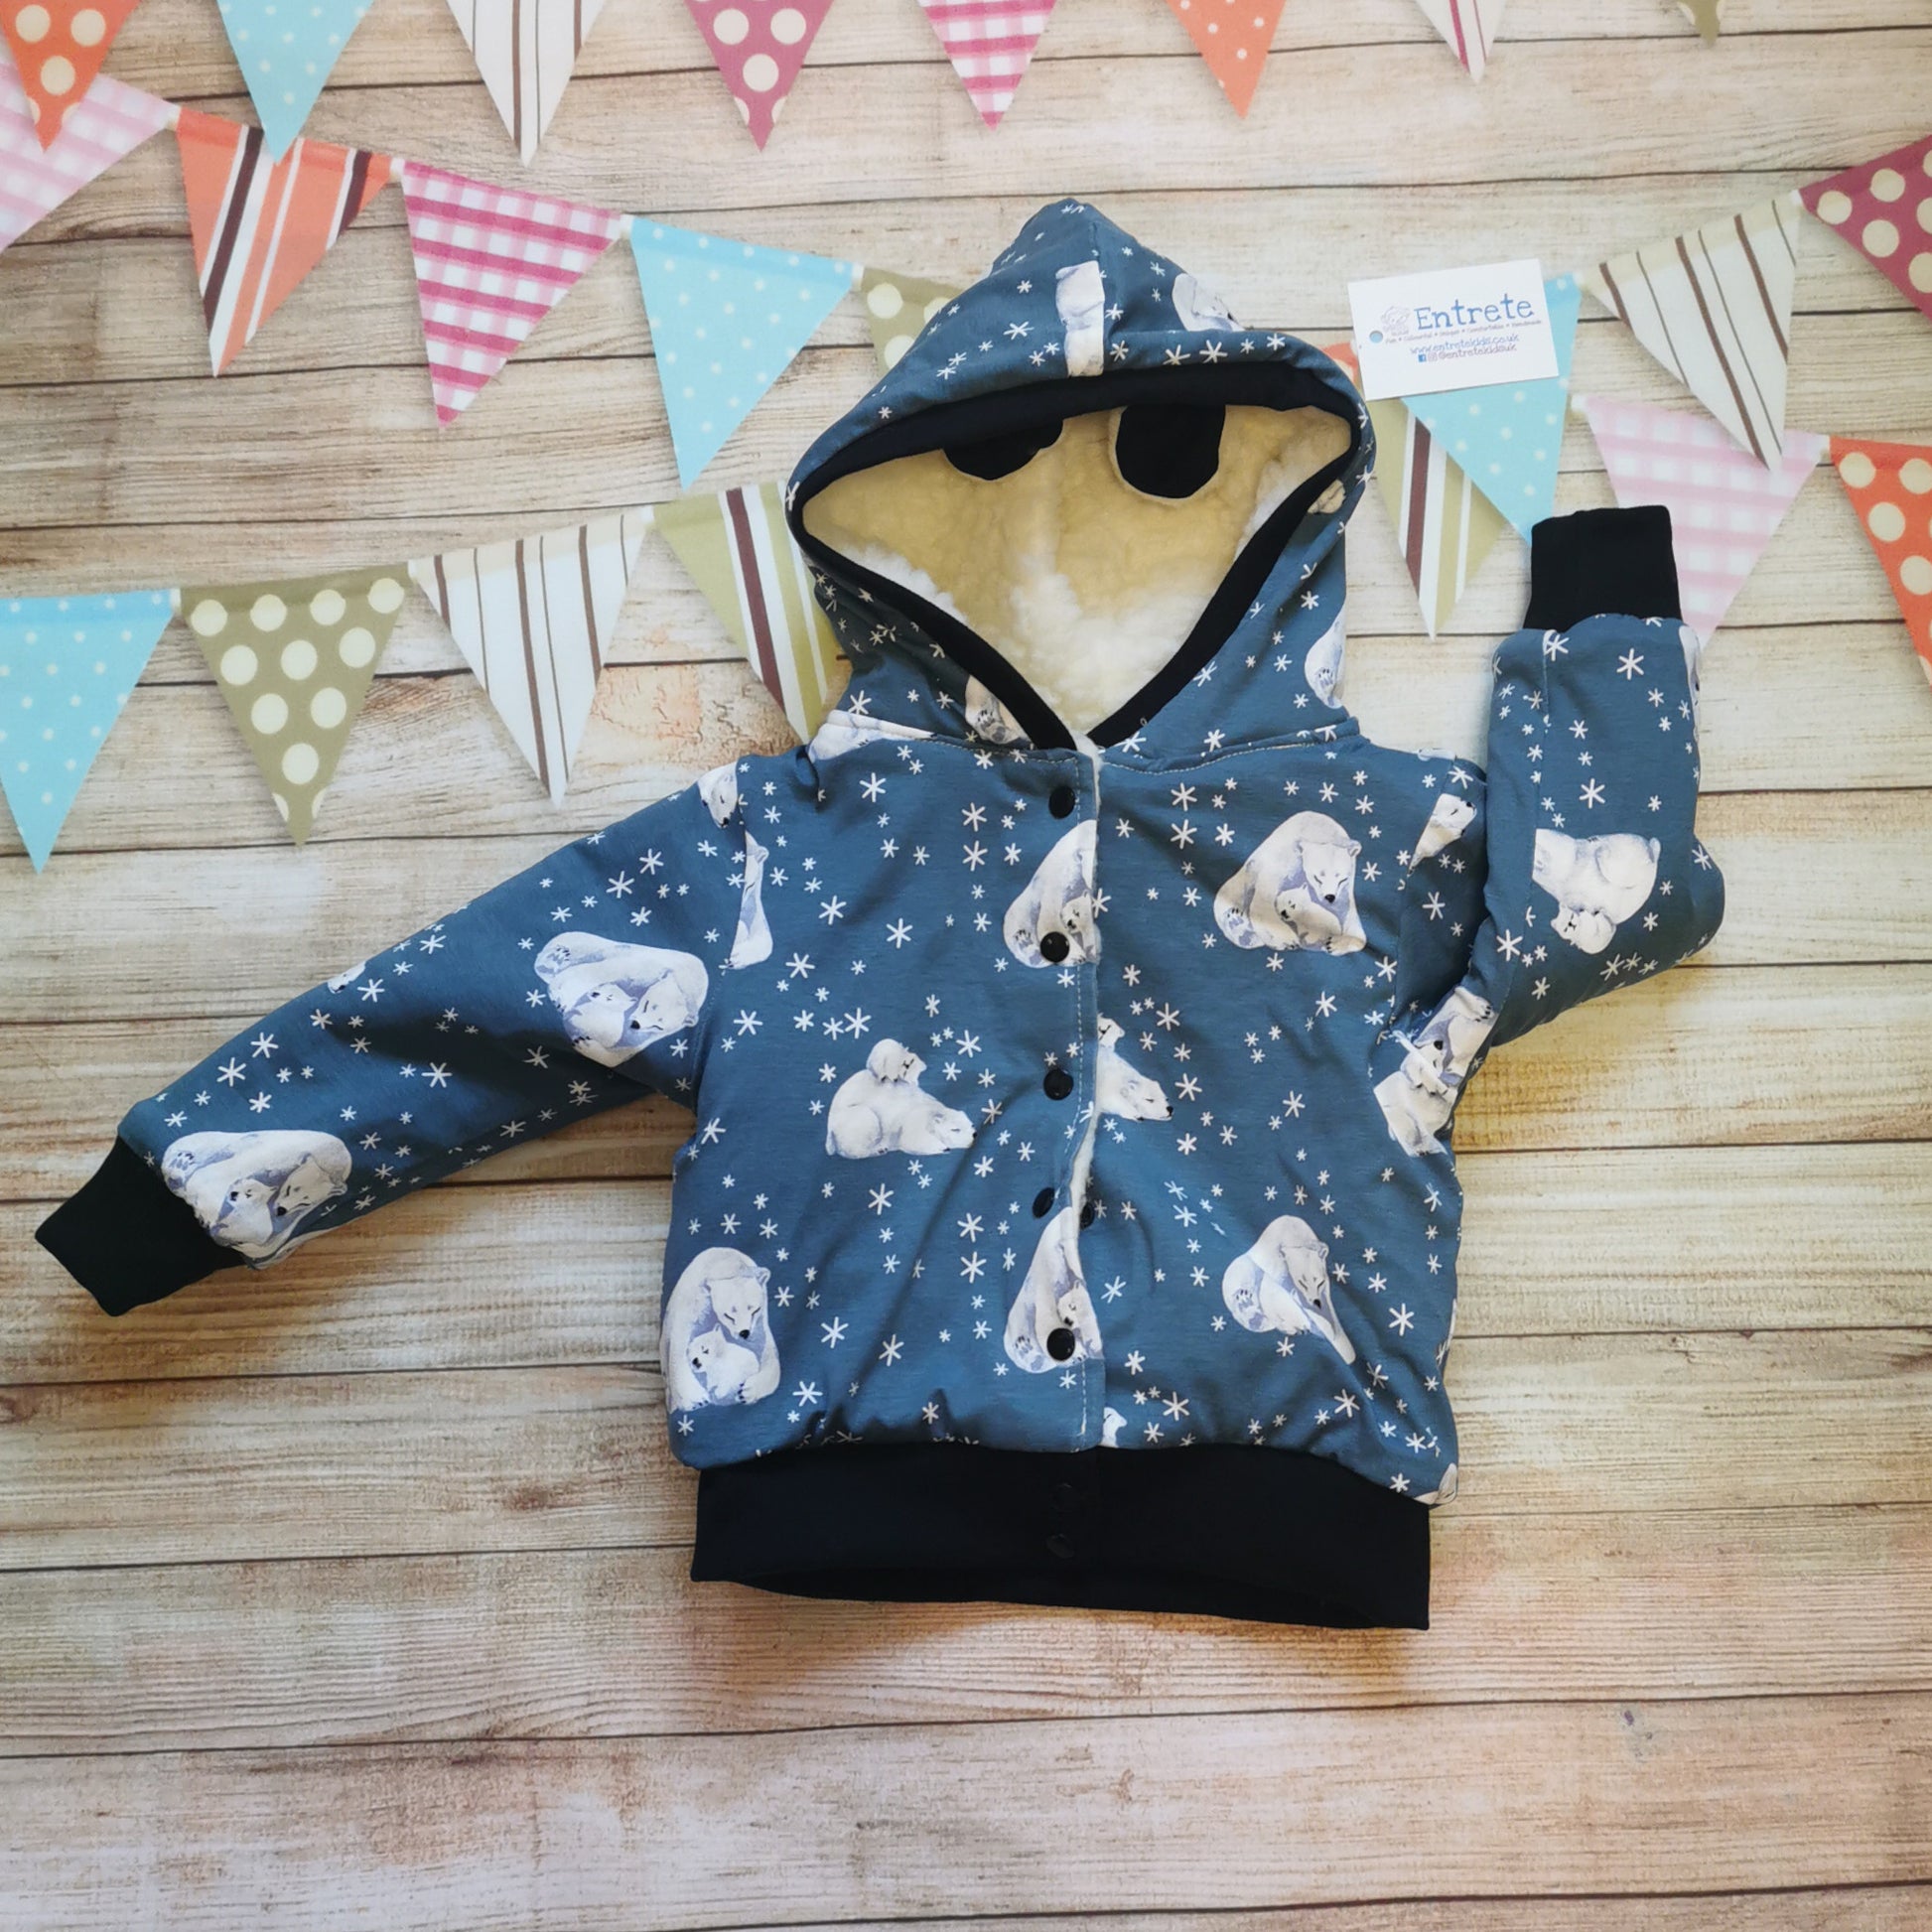 The reverse side of the adorable polar bear hoodie. Handmade using dusty blue polar bears cotton jersey and black cotton ribbing, with warm sherpa fur lining.